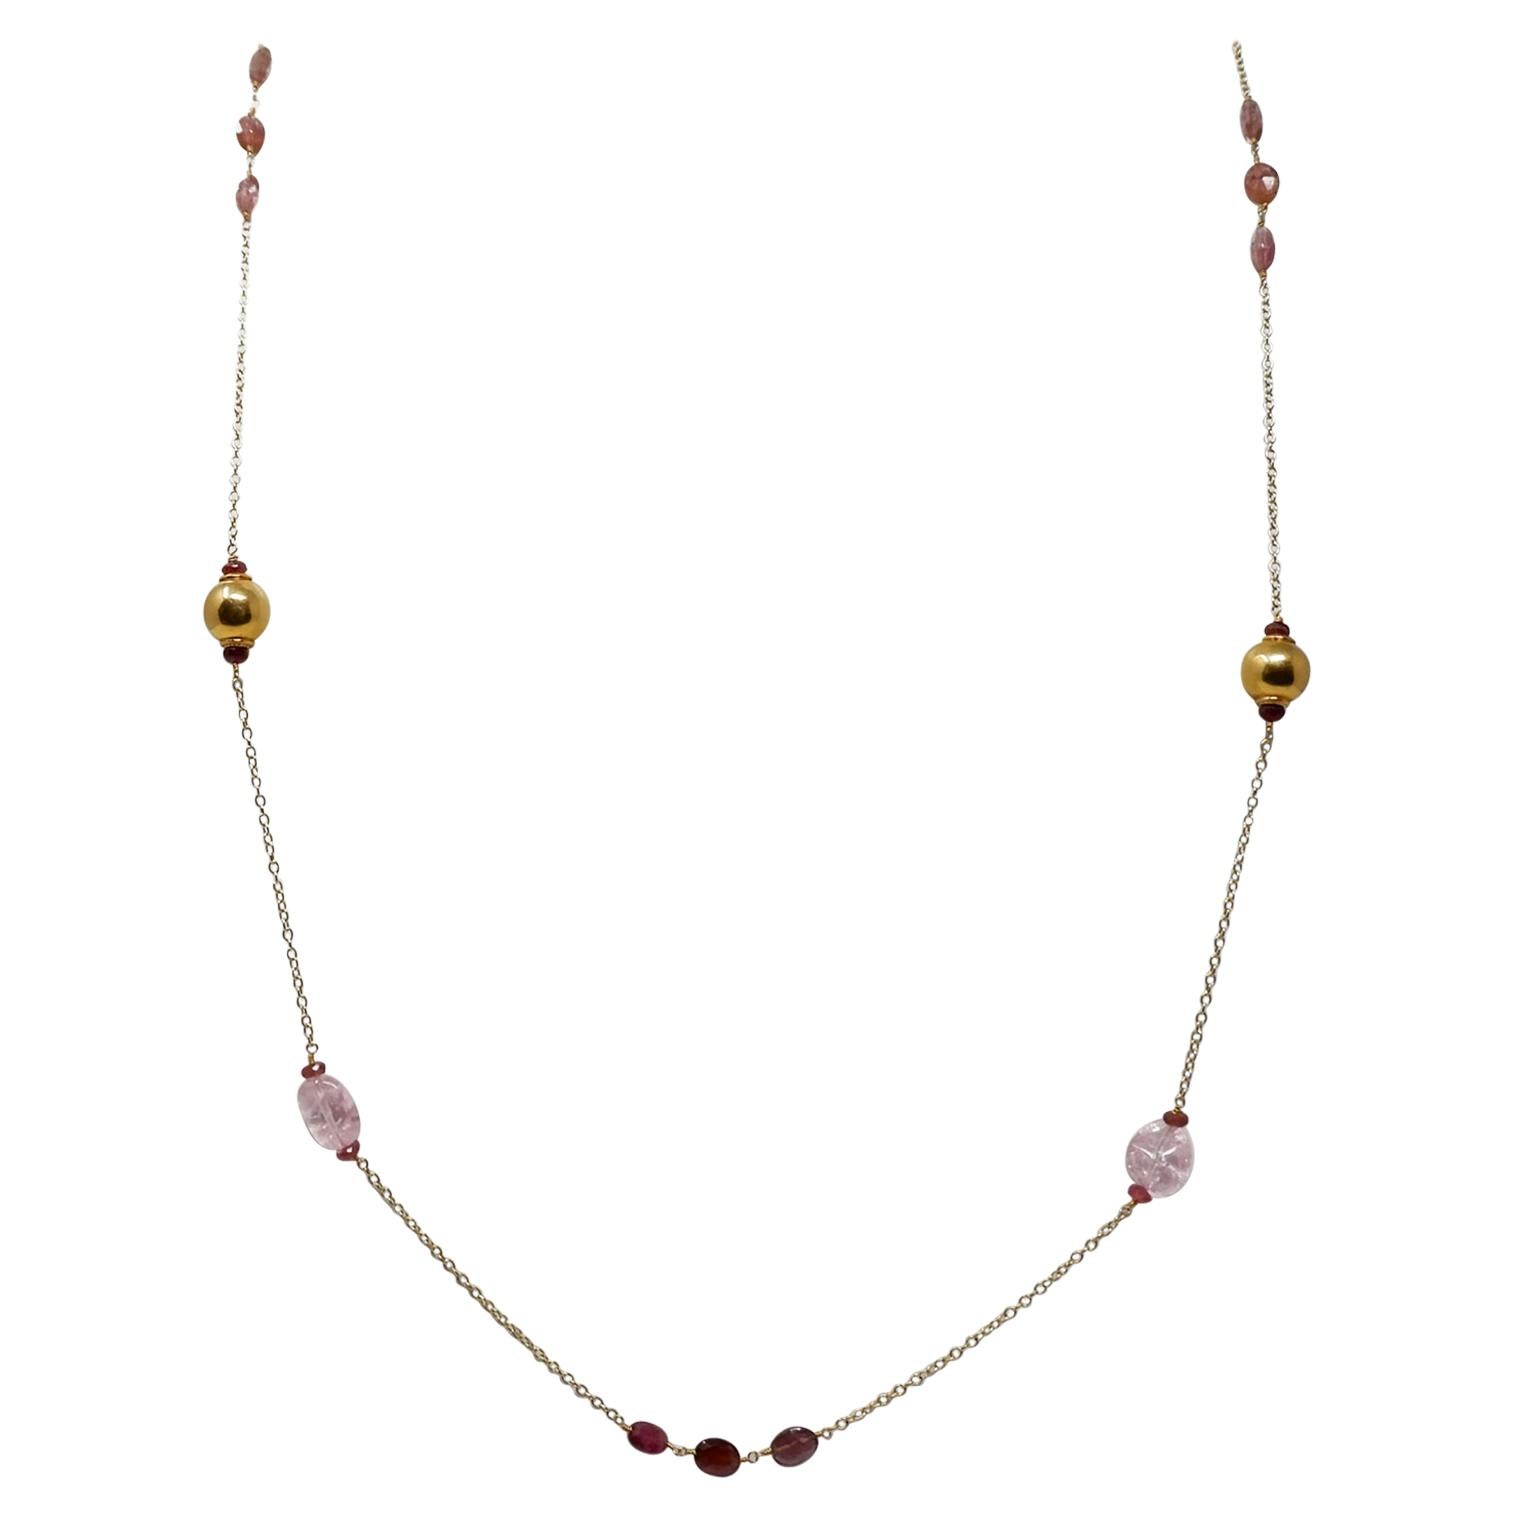 An elegant 18 karat gold, hand crafted gold necklace with tumbled light pink Morganite and faceted oval rubellite beads. The gold beads have been hand crafted in India. Morganite belongs to the sought after beryl family of gems which also includes